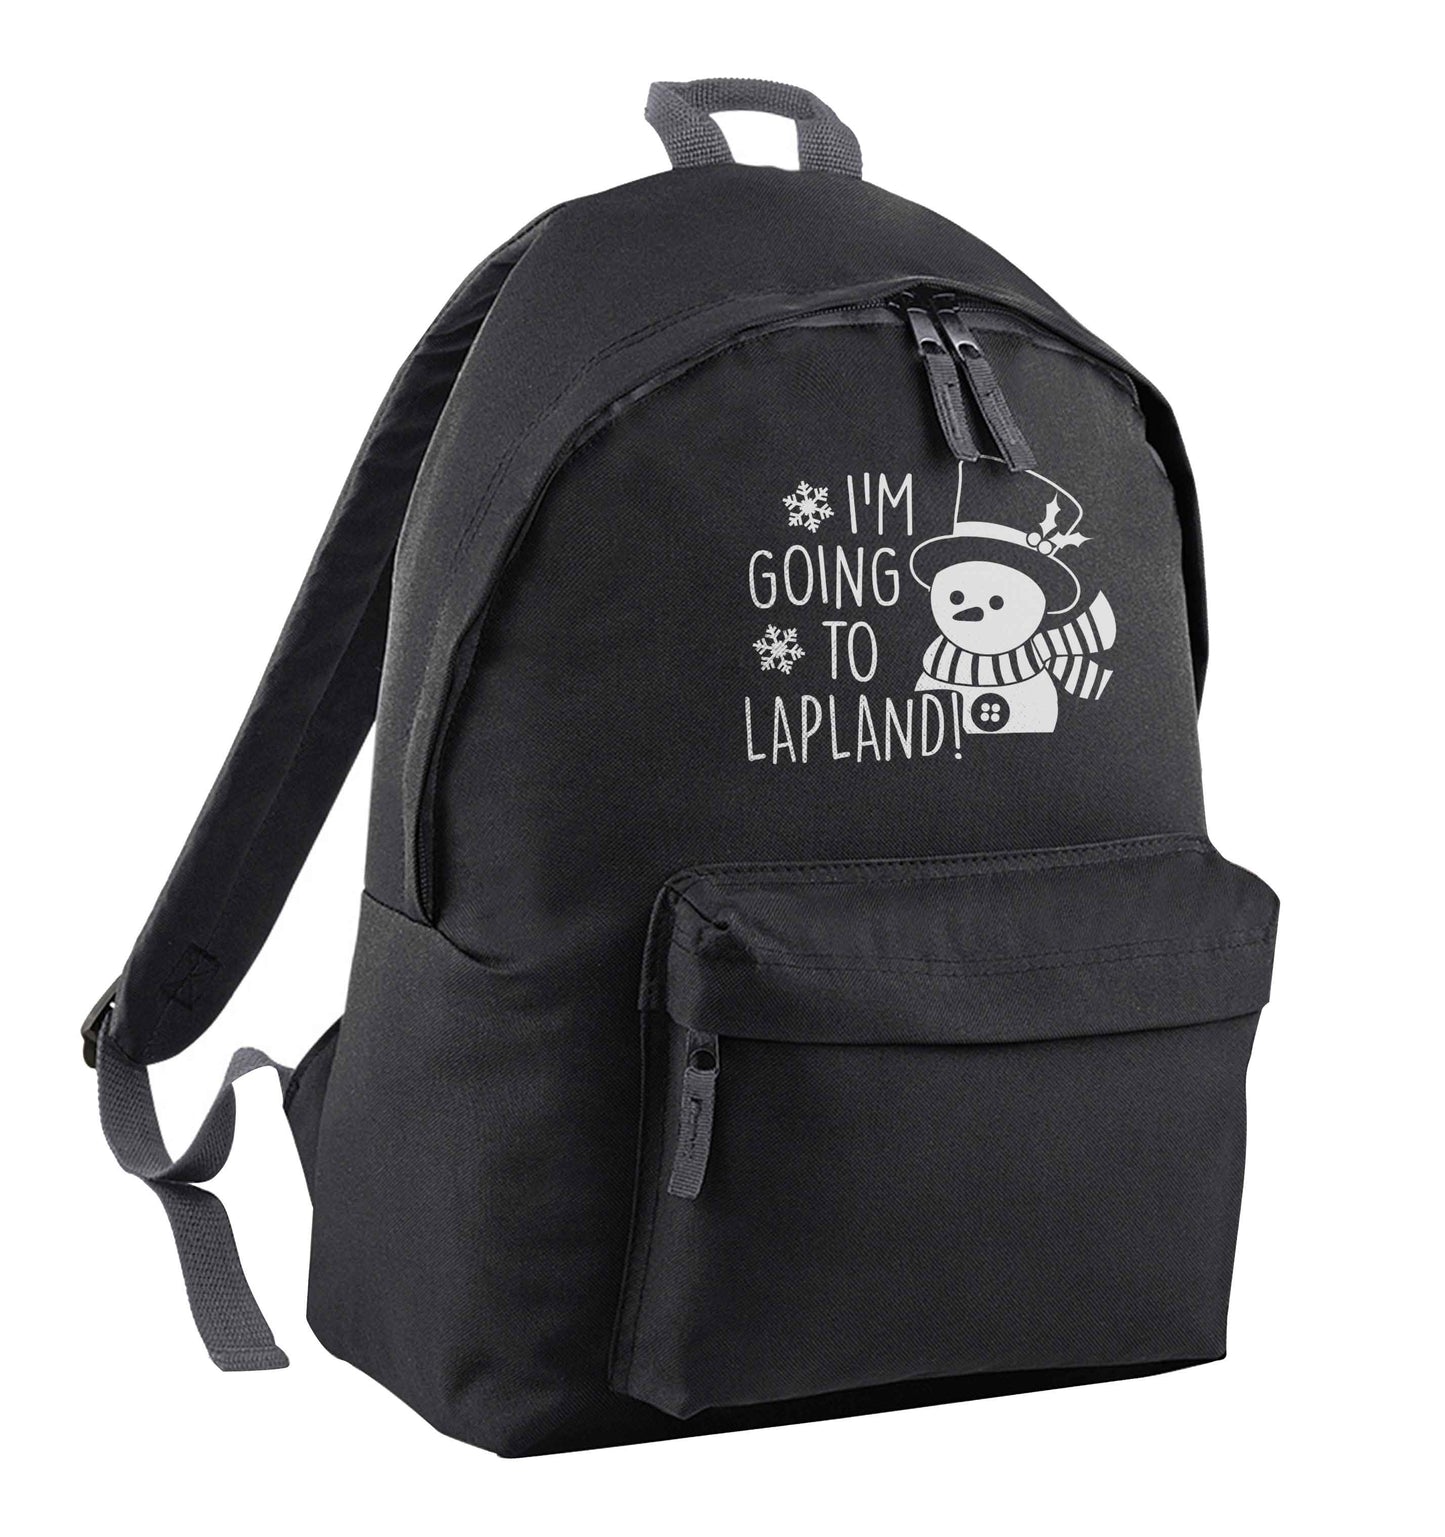 I'm going to Lapland black children's backpack